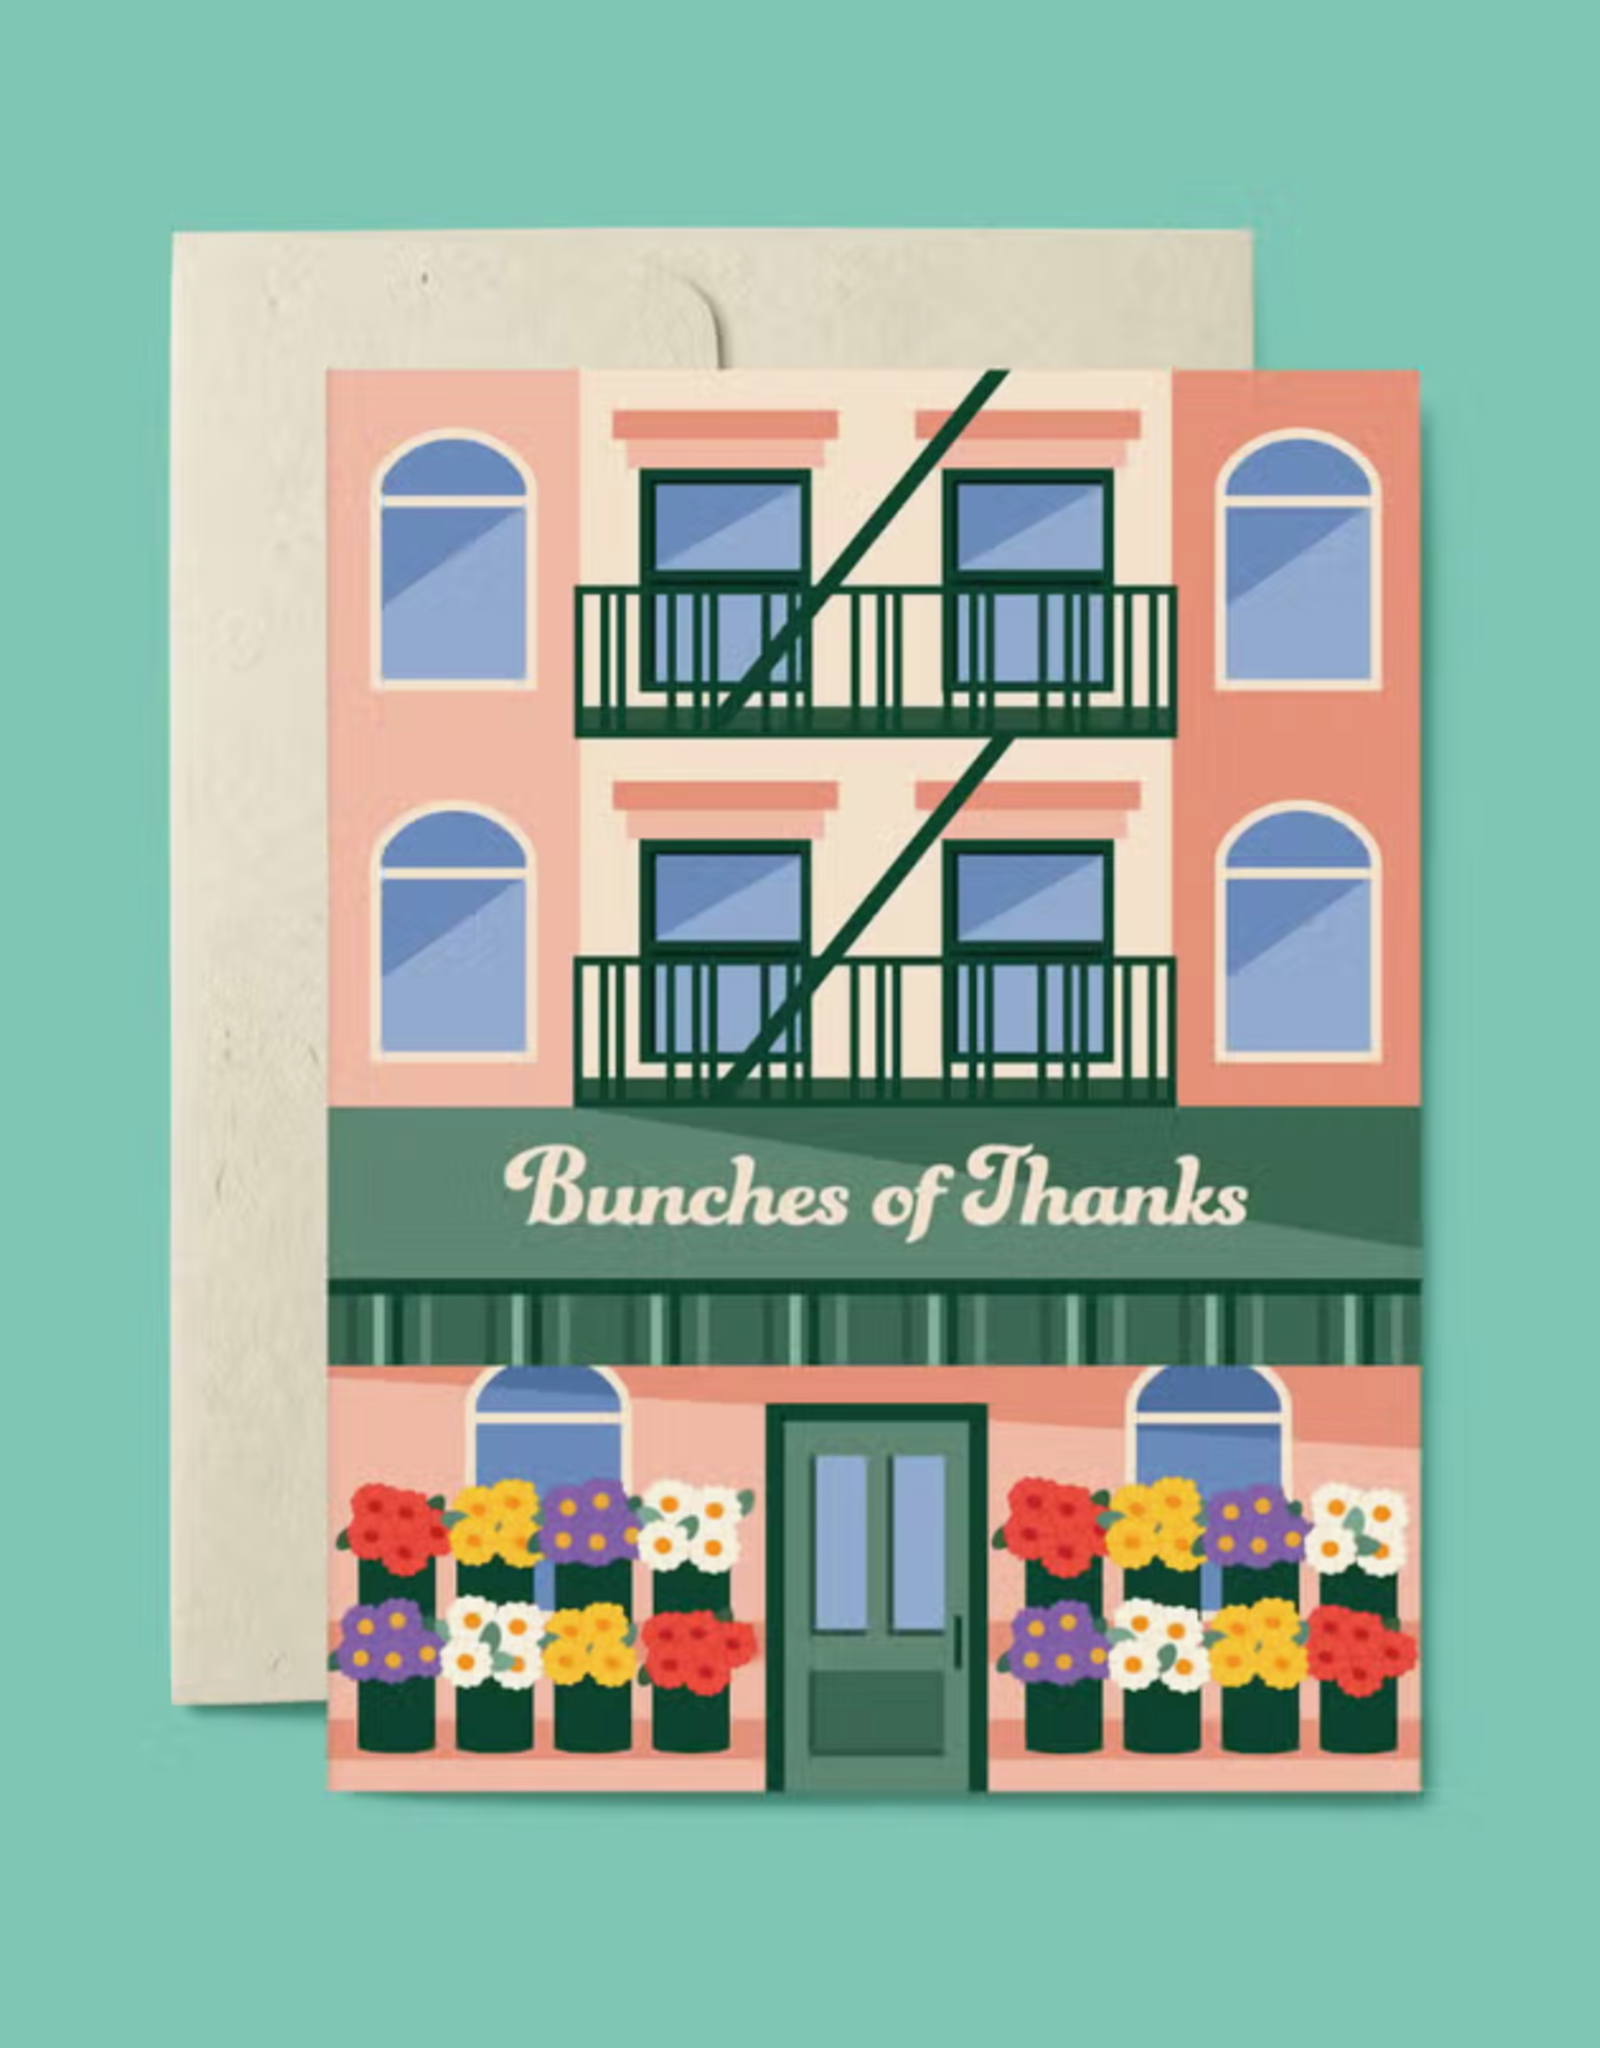 Belle Belette Card - Thanks: Bunches of Thanks